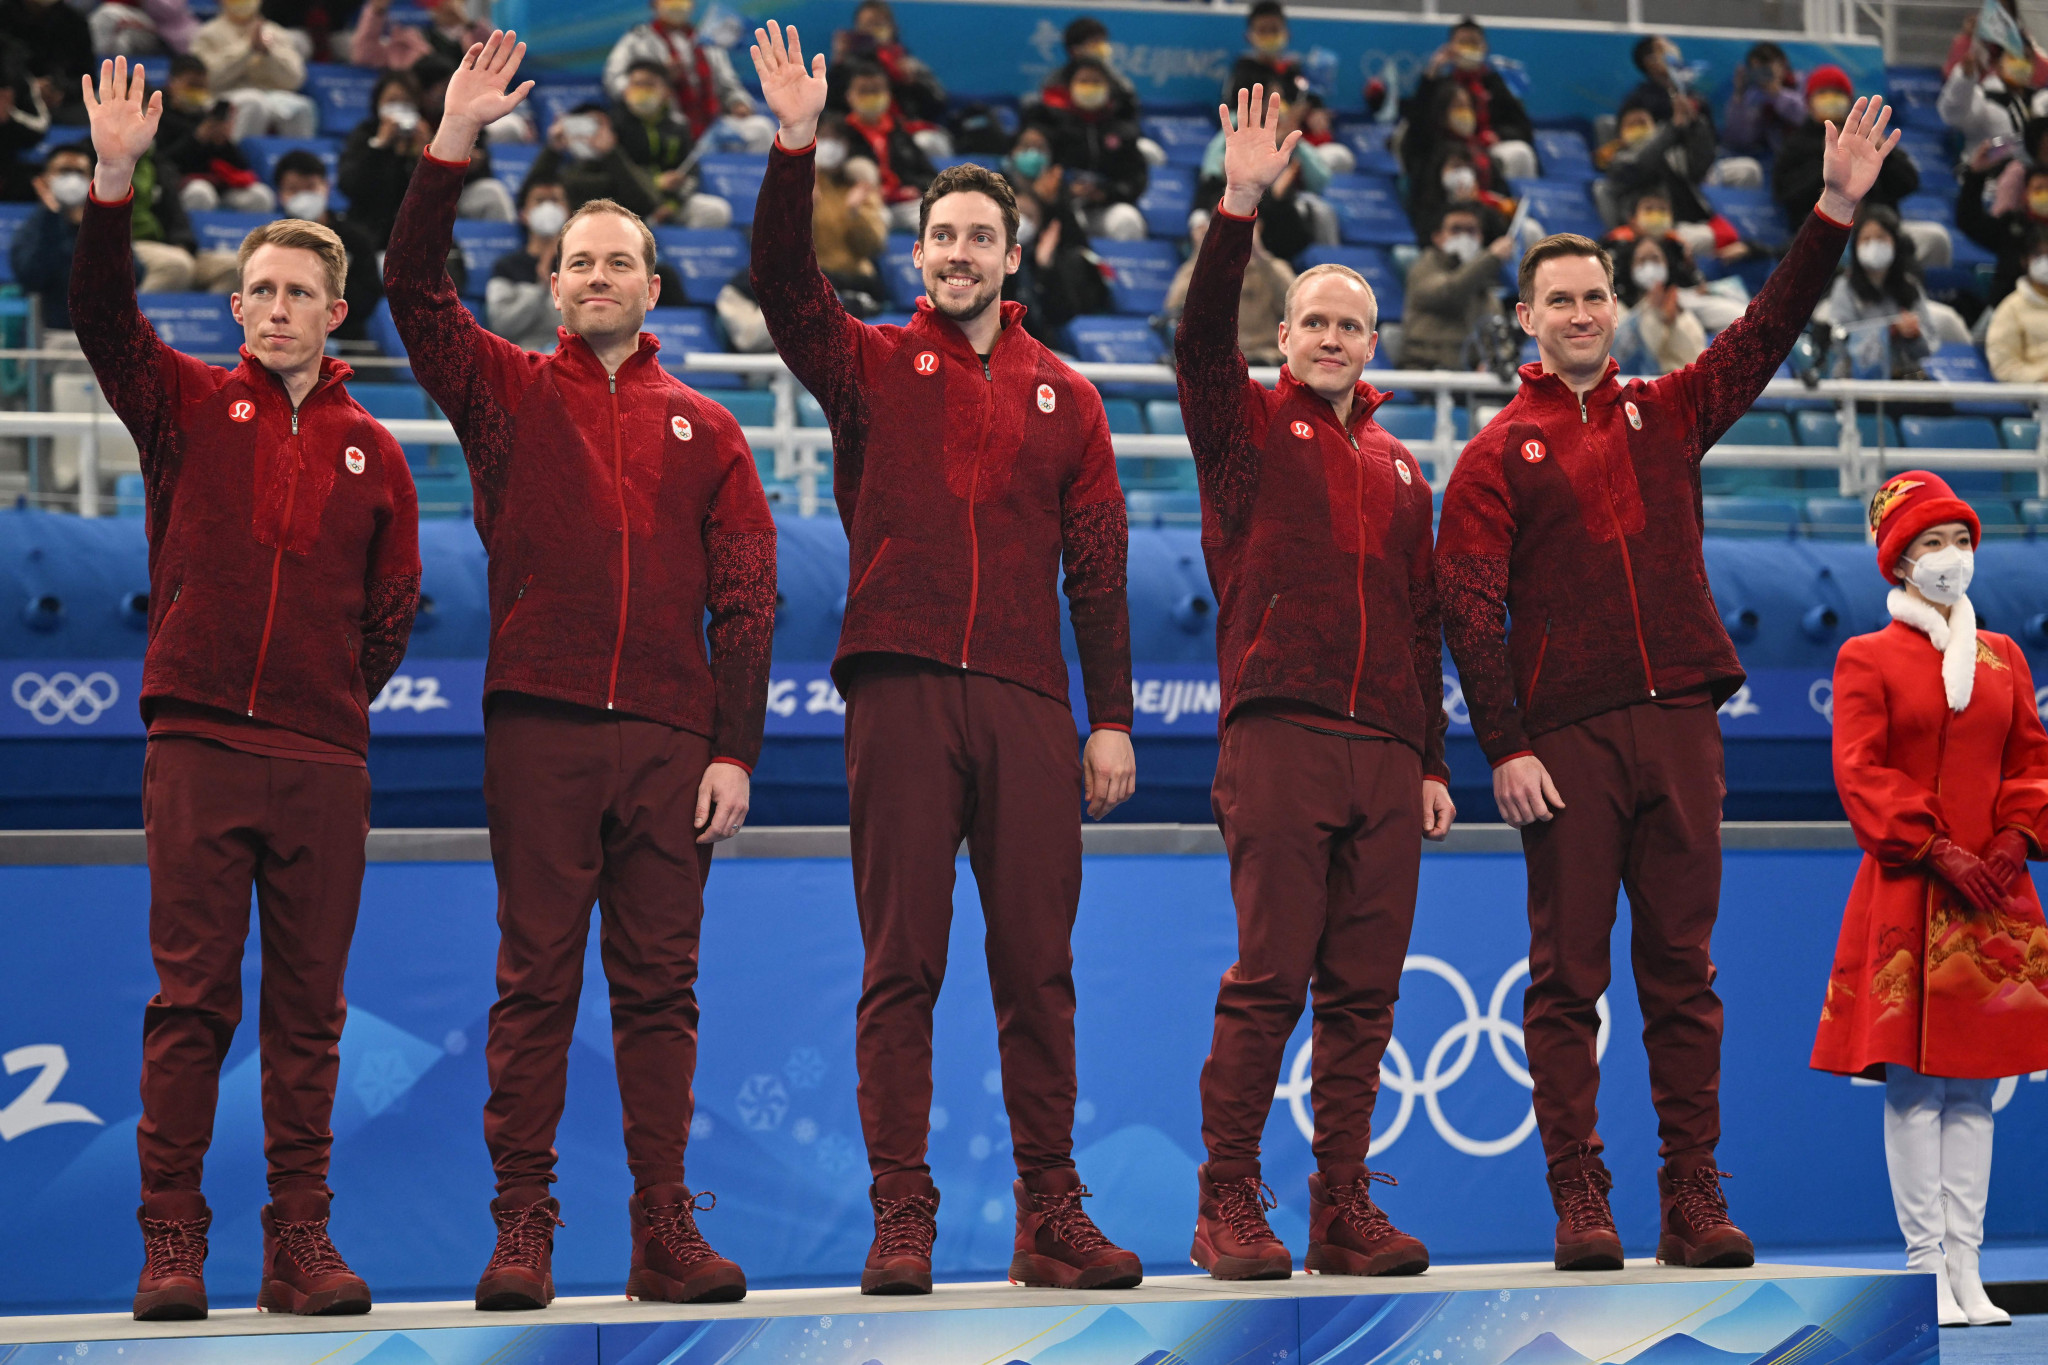 Men's bronze medallists from Beijing 2022 Canada are set to feature the same line-up at the Pan Continental Curling Championships ©Getty Images